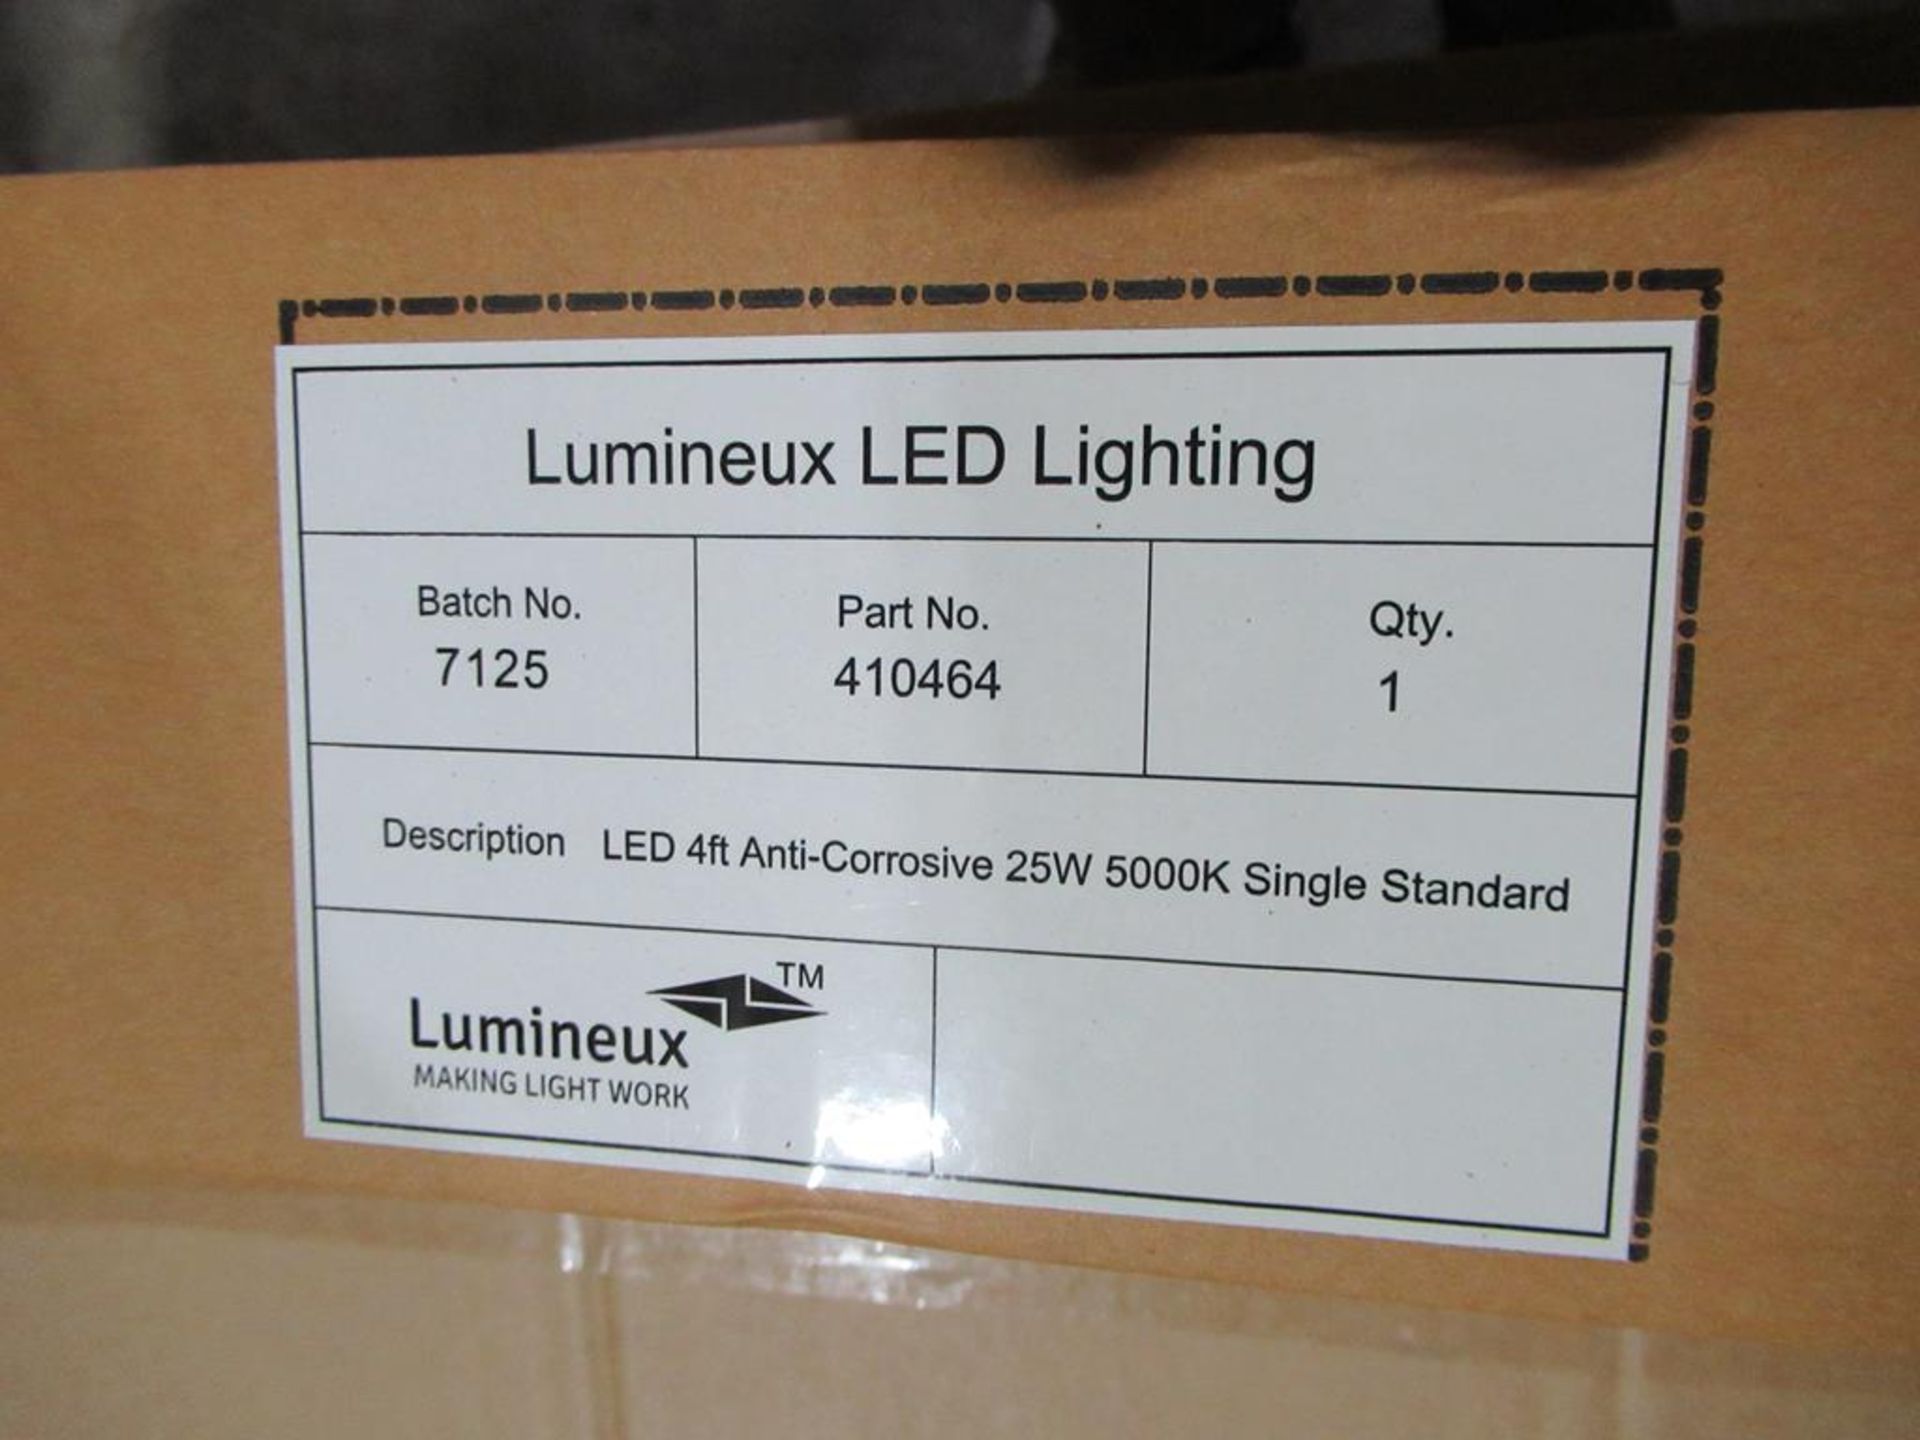 19 x LED 4ft Anti-Corrosive 25W 5000K Single with Tridonic Drivers OEM Trade Price £380 - Image 3 of 3